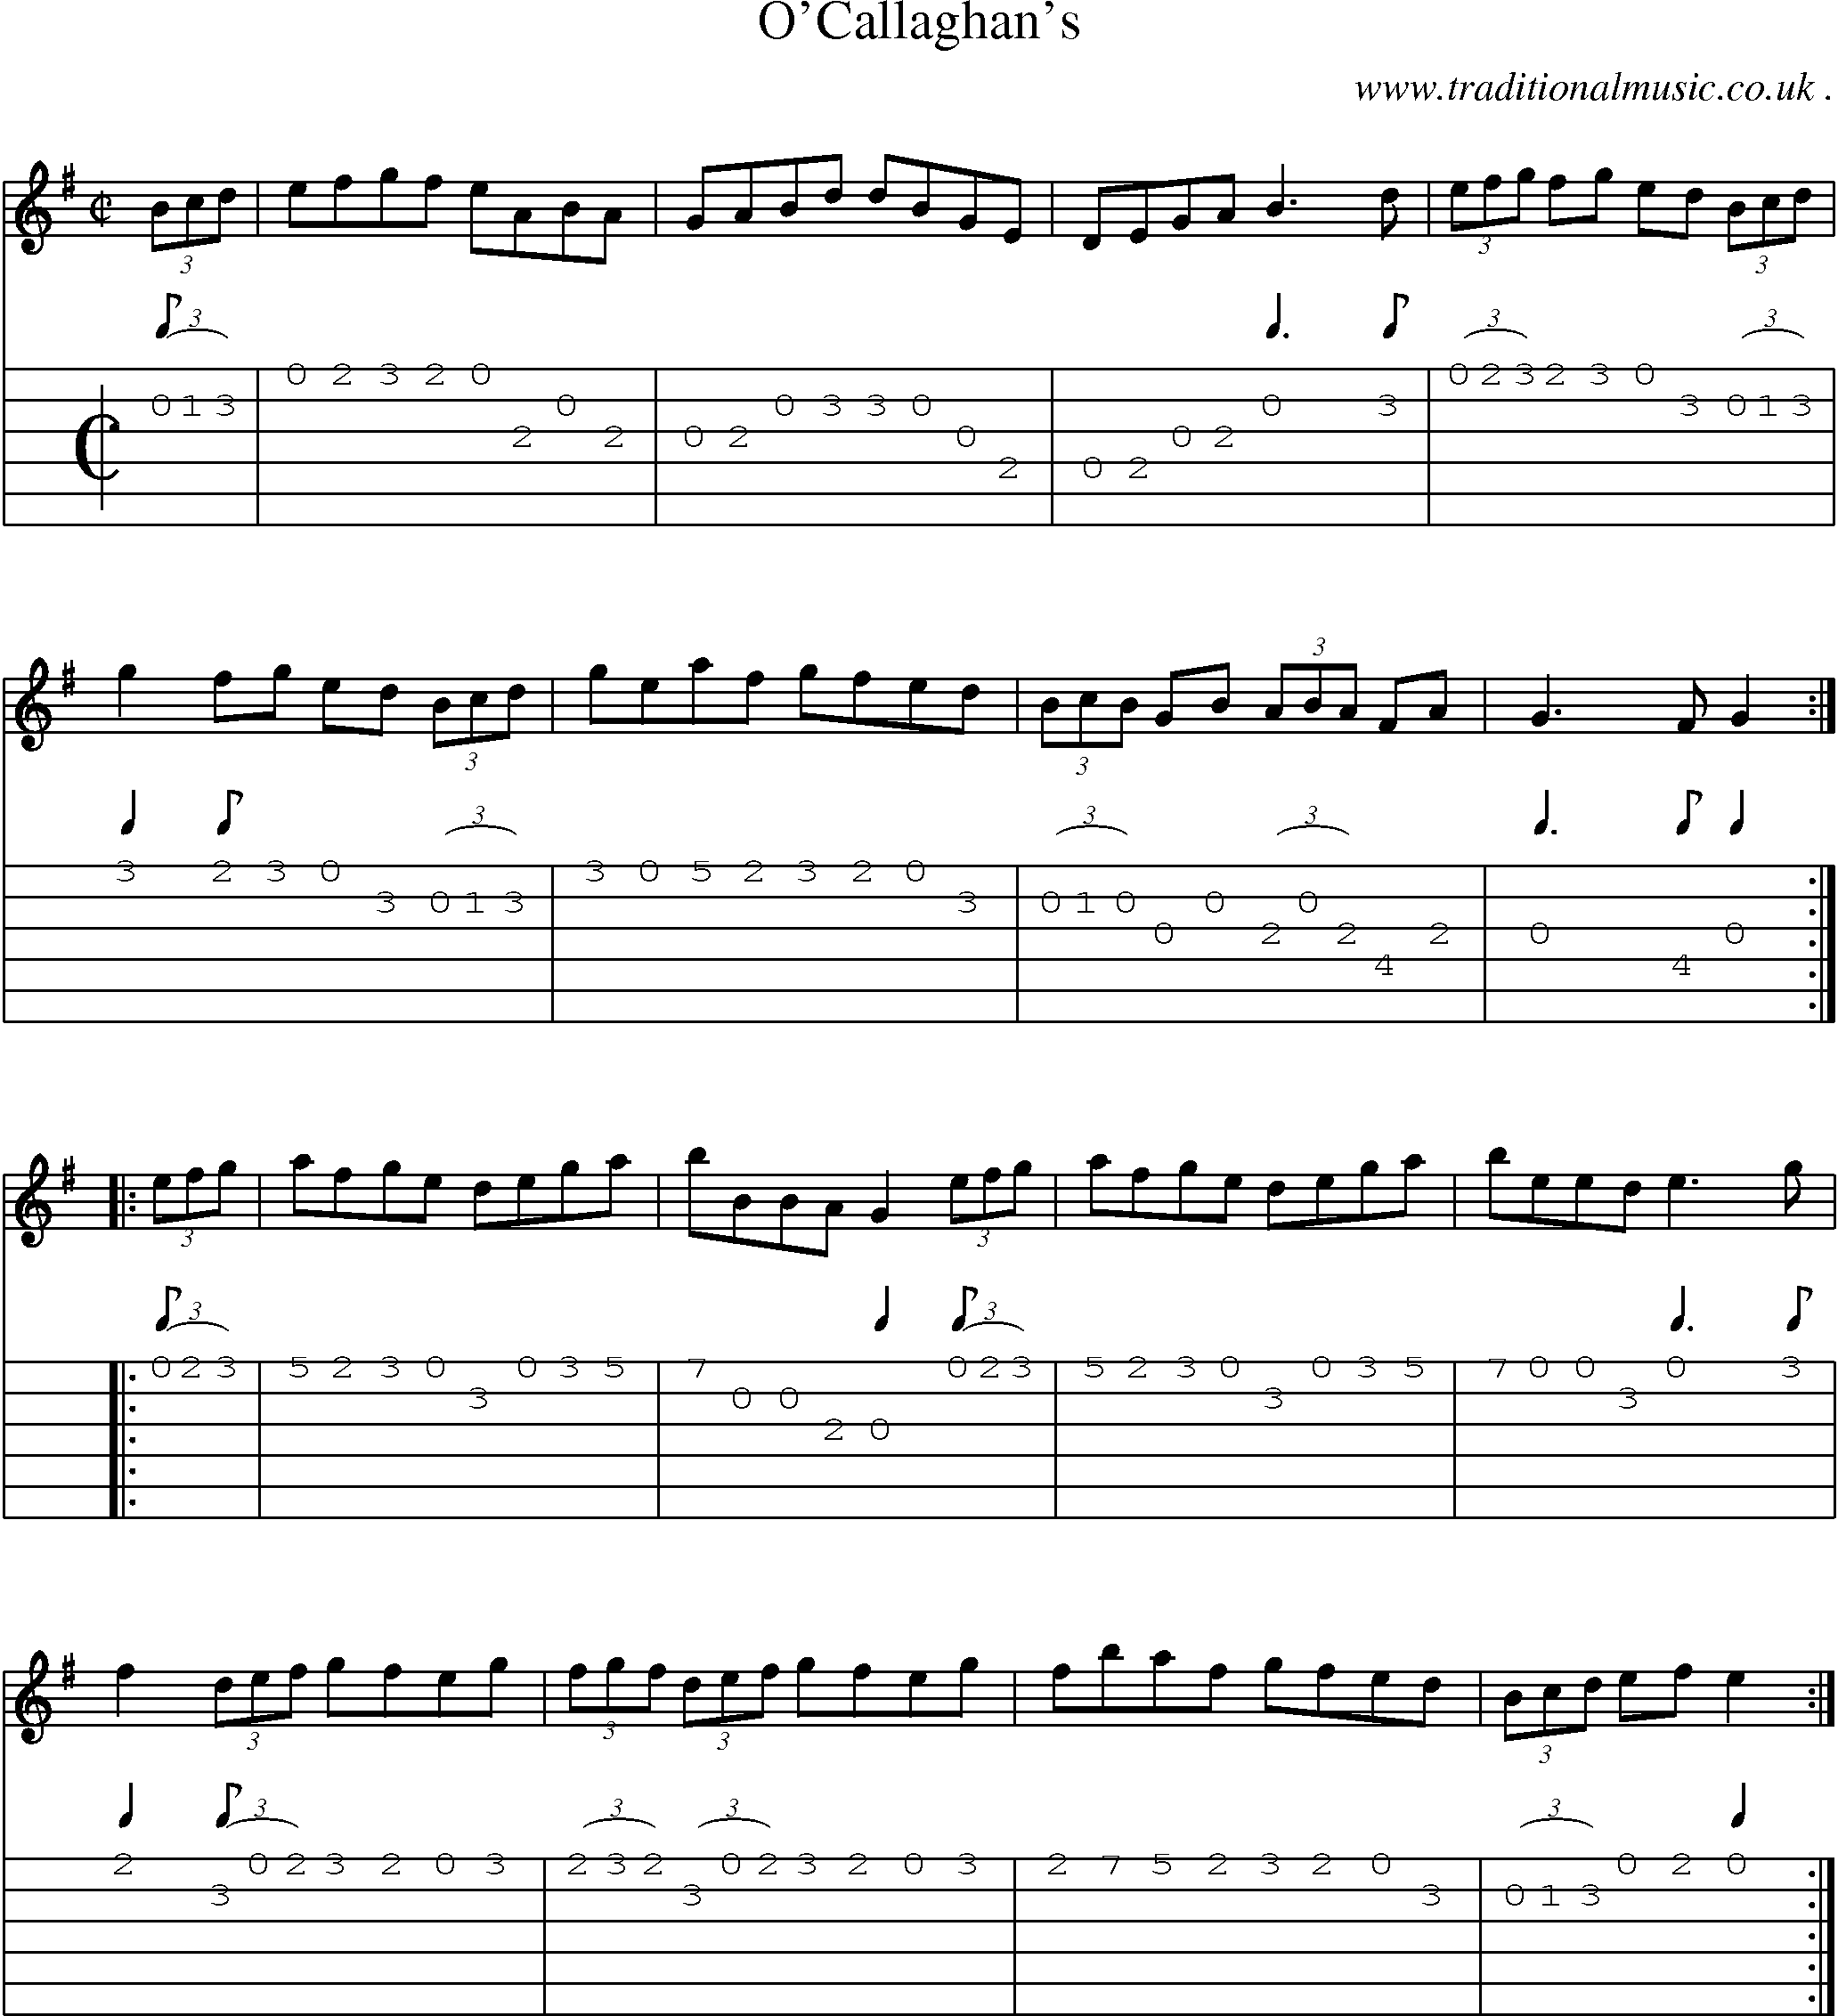 Sheet-Music and Guitar Tabs for Ocallaghans